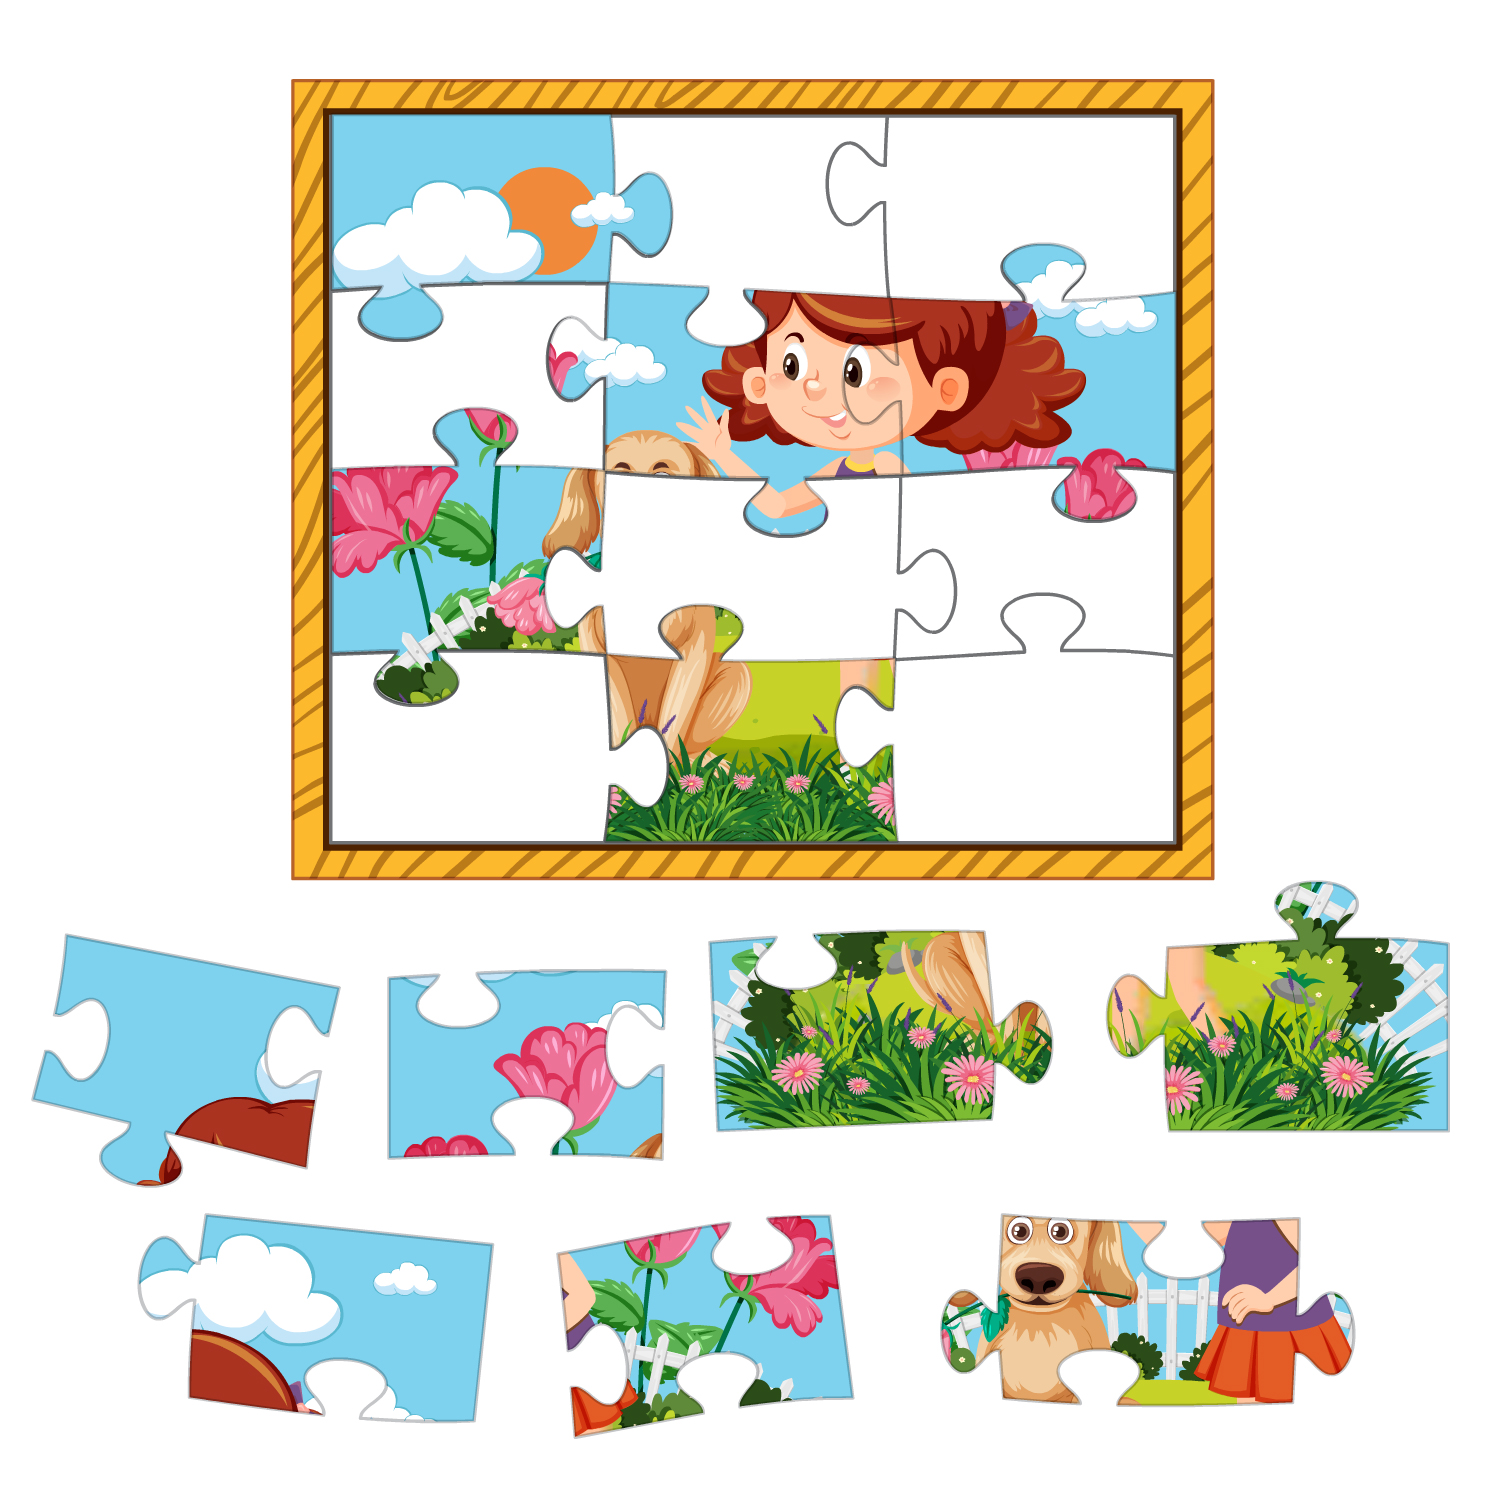 Puzzles with the squared edged border frame